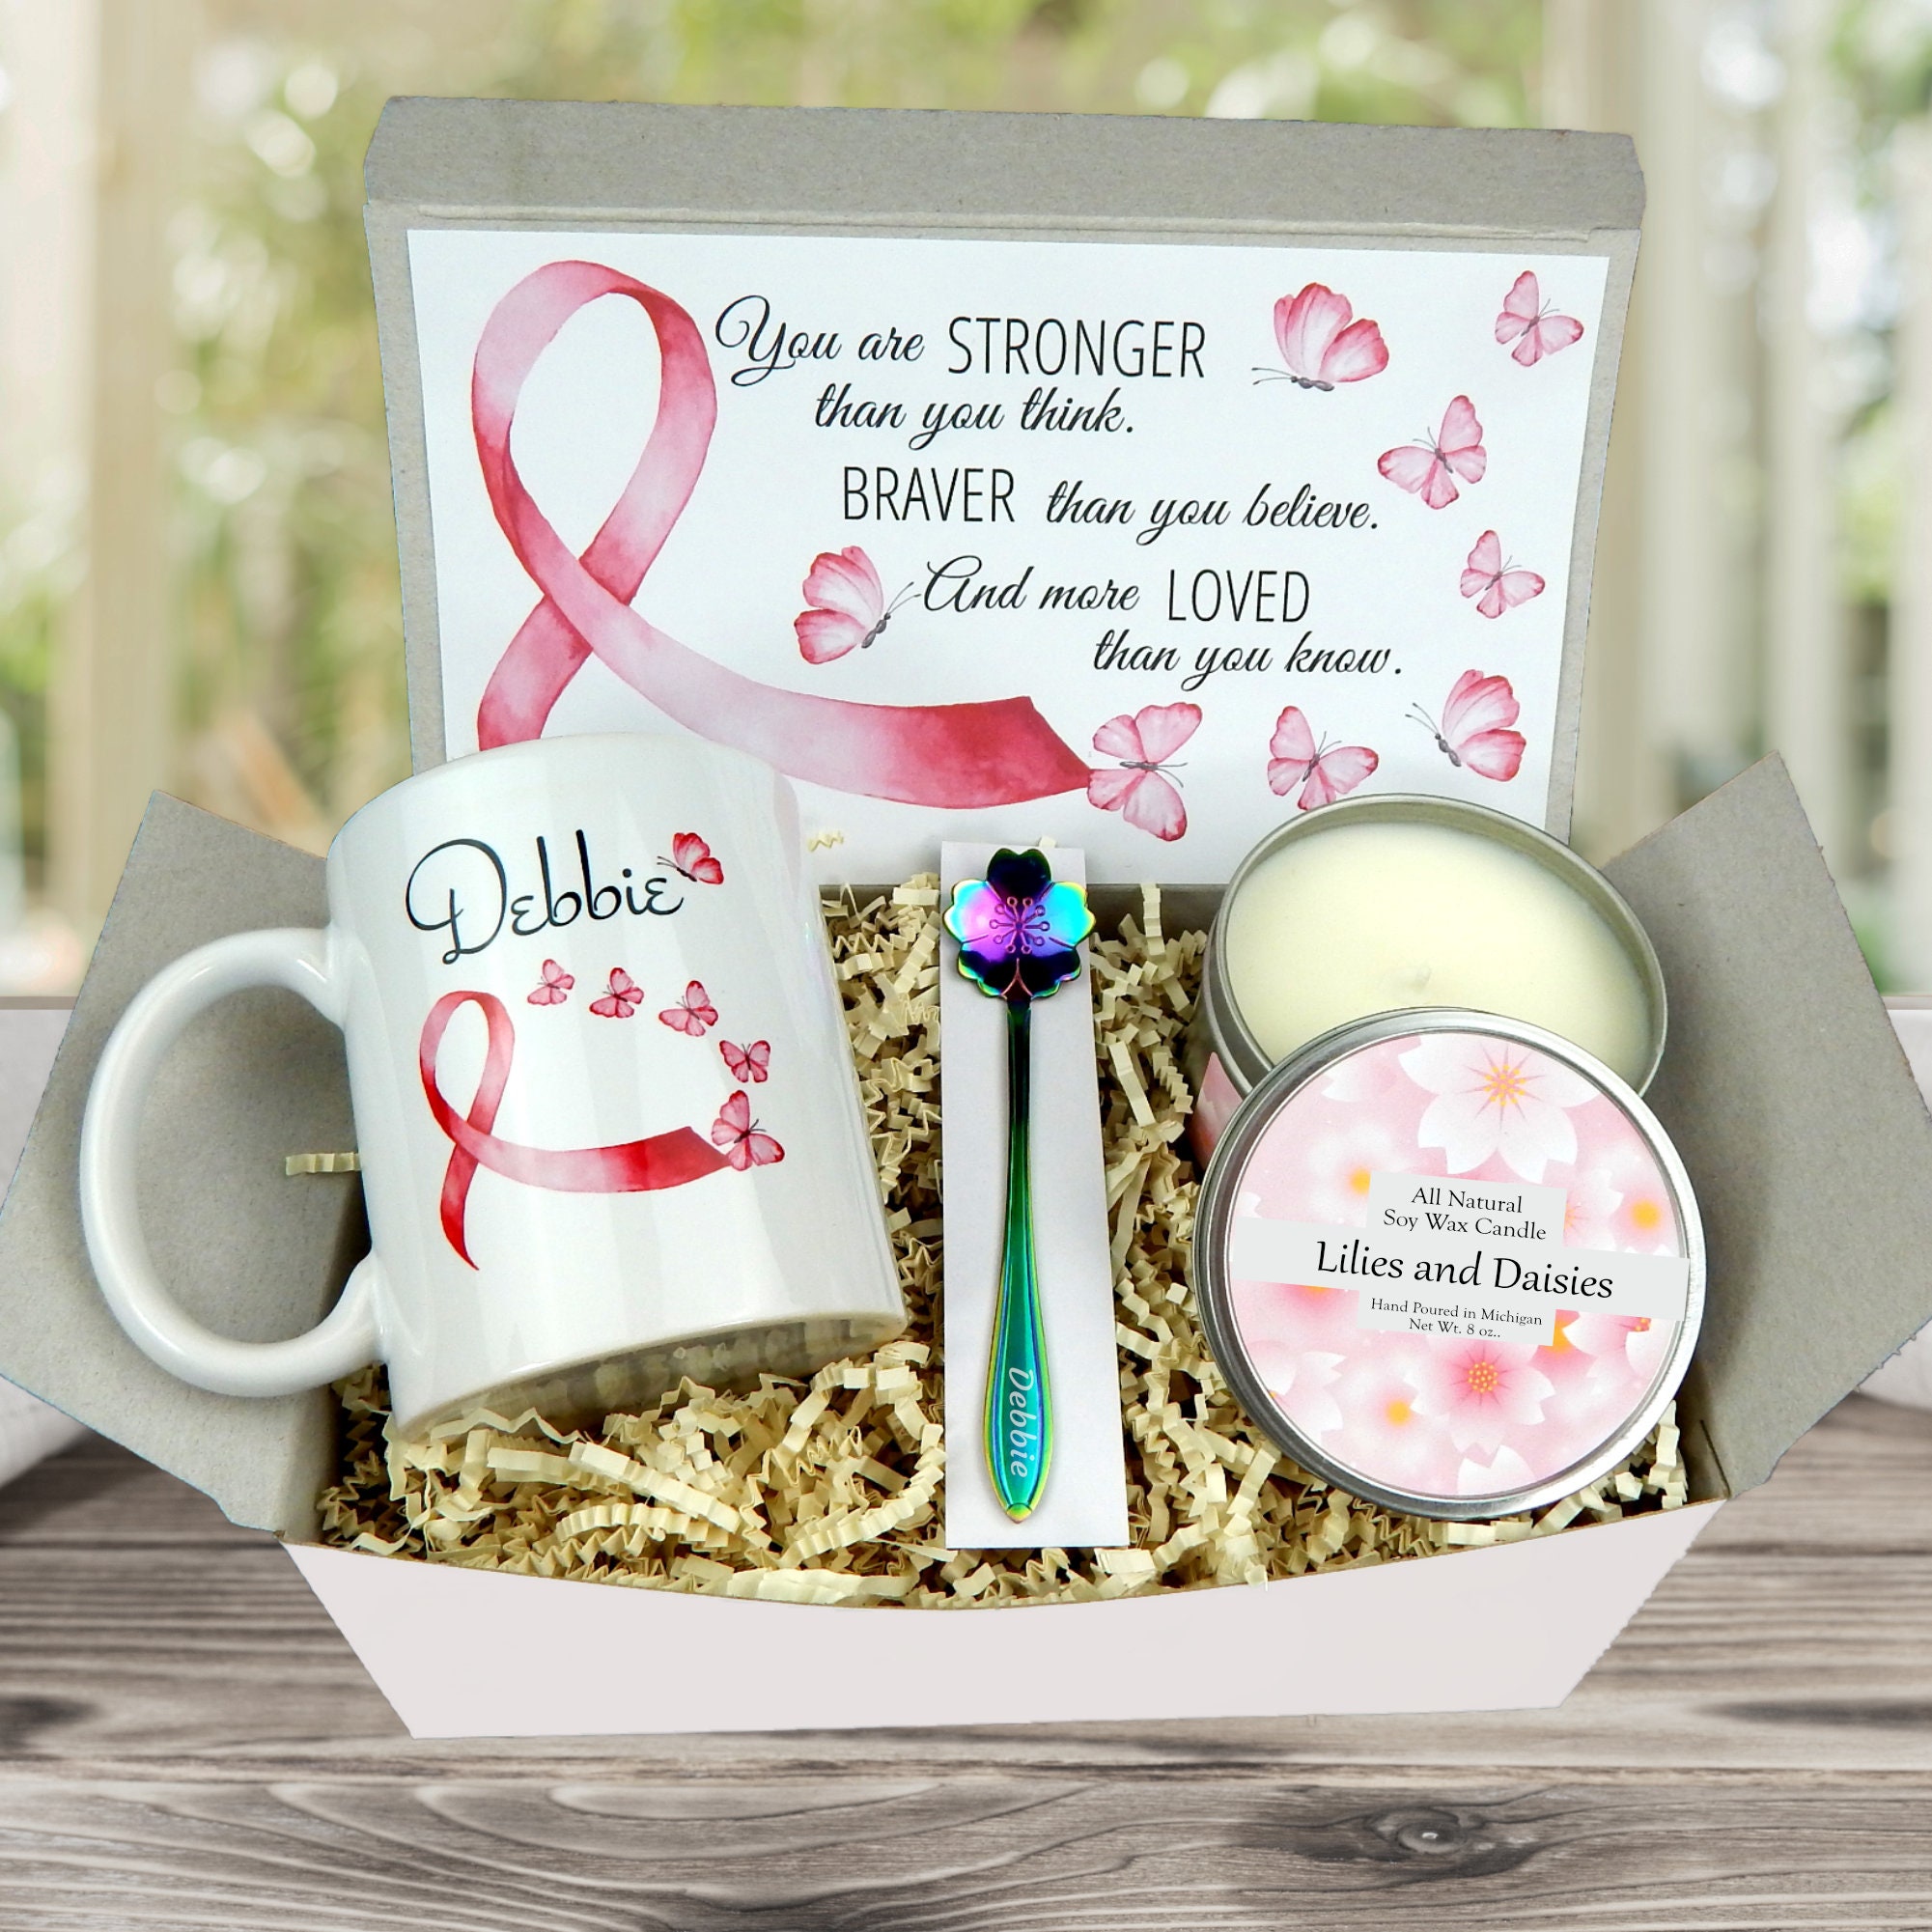  Jztco Breast Cancer Gifts for Women Funny Sympathy Gift  Encouragement Gifts for Women Friend BFF Bestie Female Coworker Makeup Bag  Breast Cancer Patient Gifts Breast Cancer Fighter Gifts : Beauty 